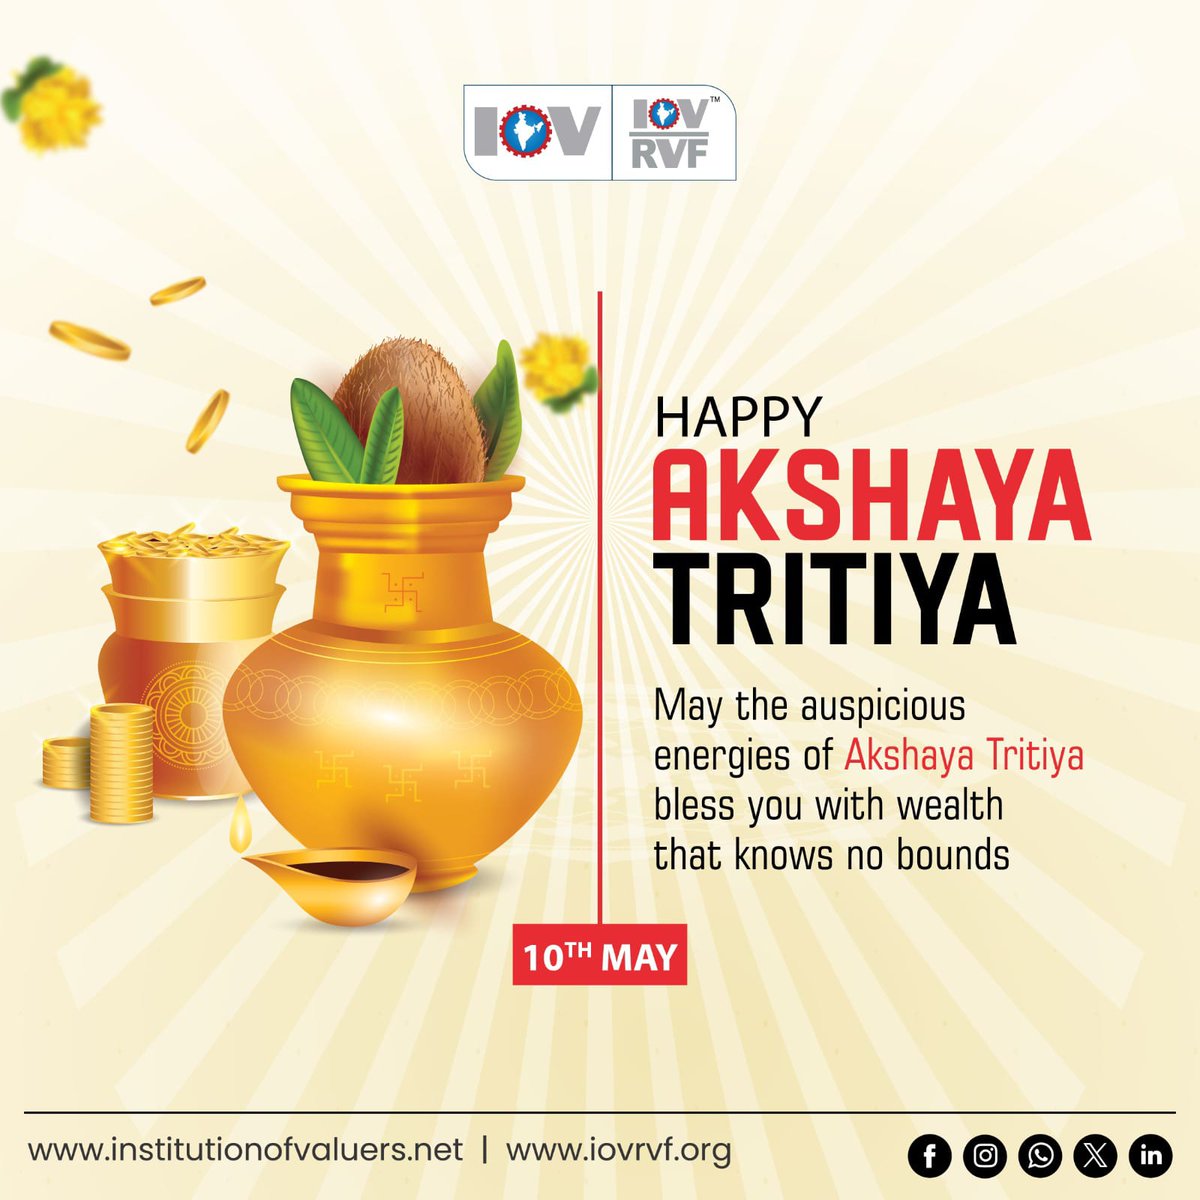 May the auspicious occasion of Akshaya Tritiya bless you with prosperity, success, and endless opportunities. Wishing you abundance and happiness today and always 😊 #akshayatritiya2024 #AkshayaTritiya #अक्षय_तृतीया #Prosperity #blessings #HappyAkshayaTritiya #india #IOV #IOVRVF